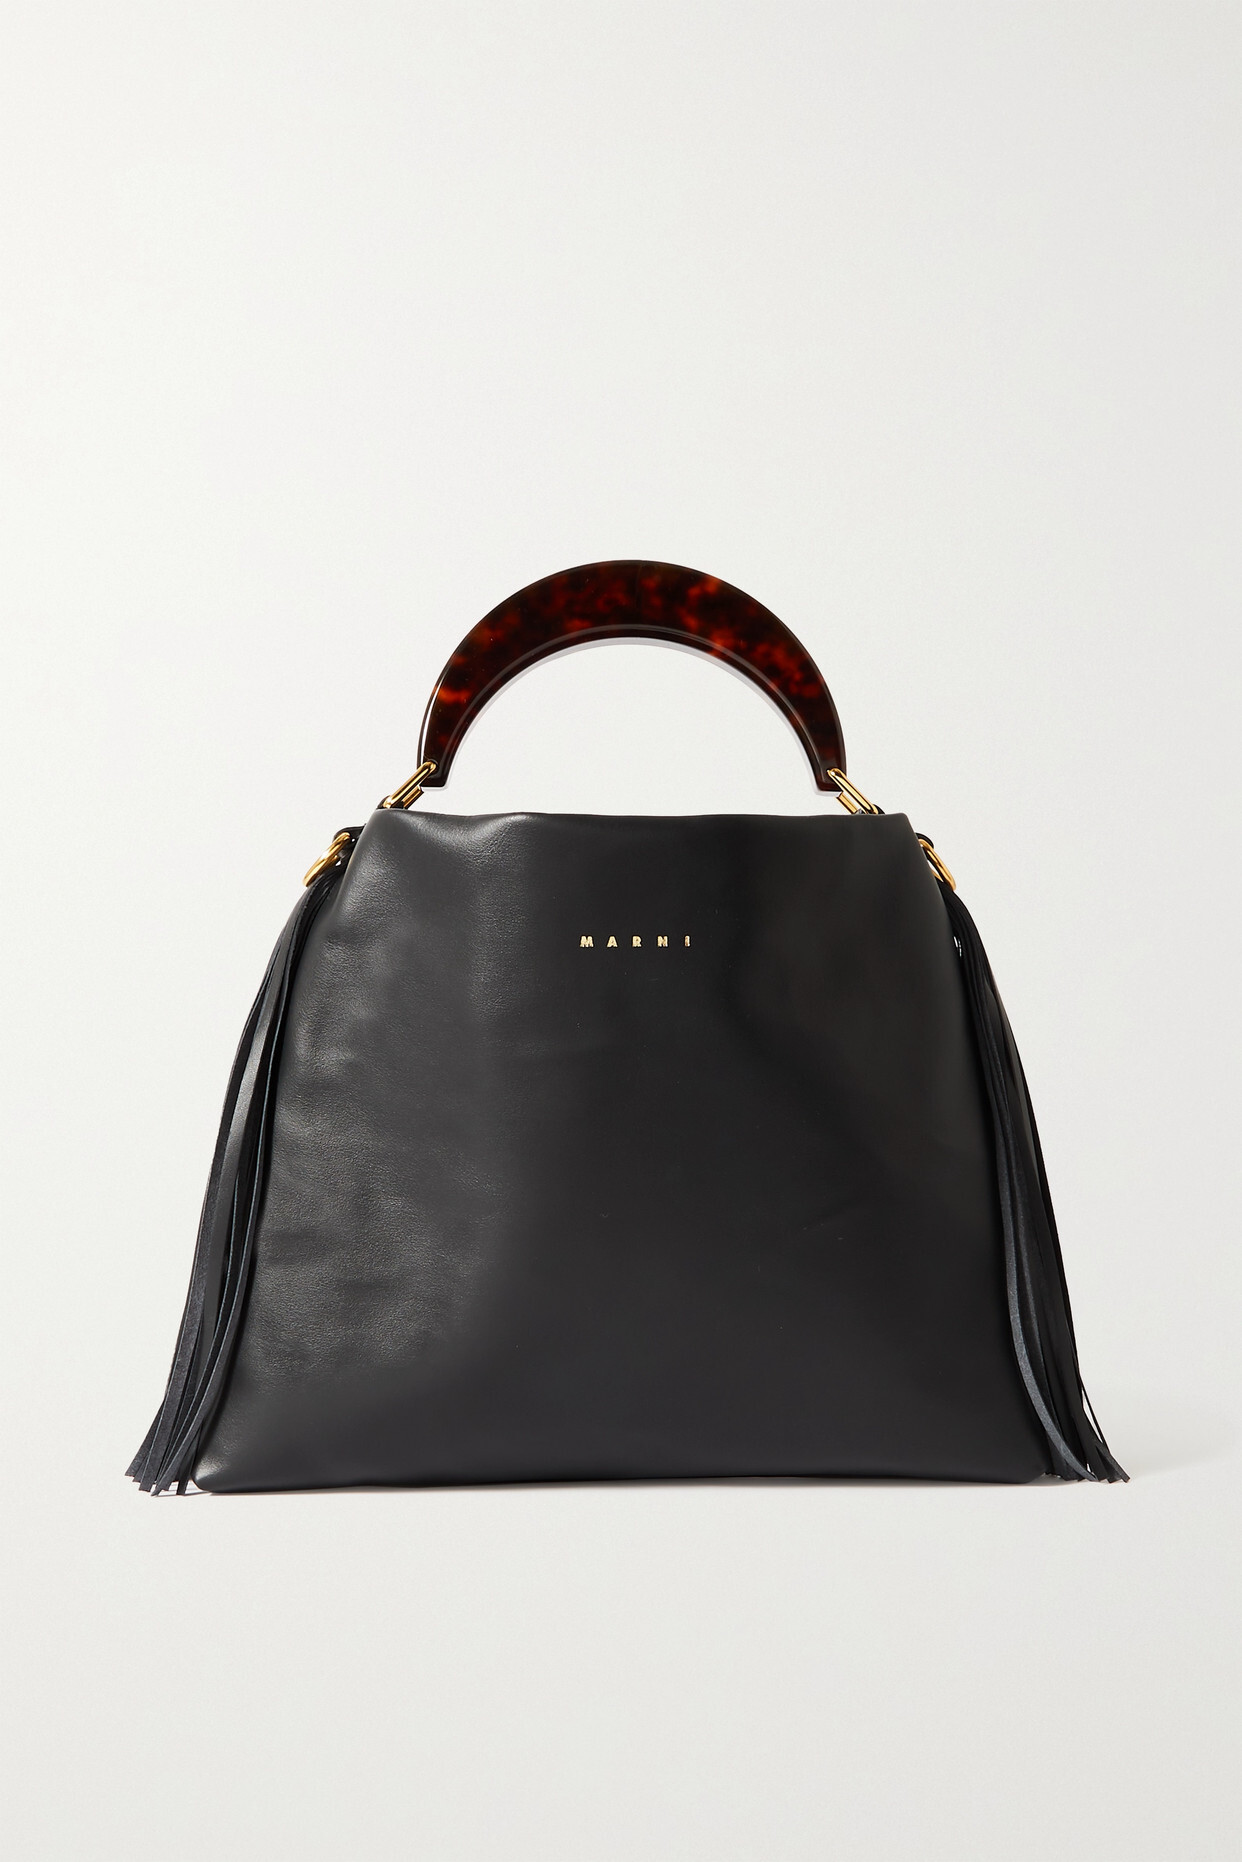 Marni - Venice Small Marbled Resin And Leather Tote - Black